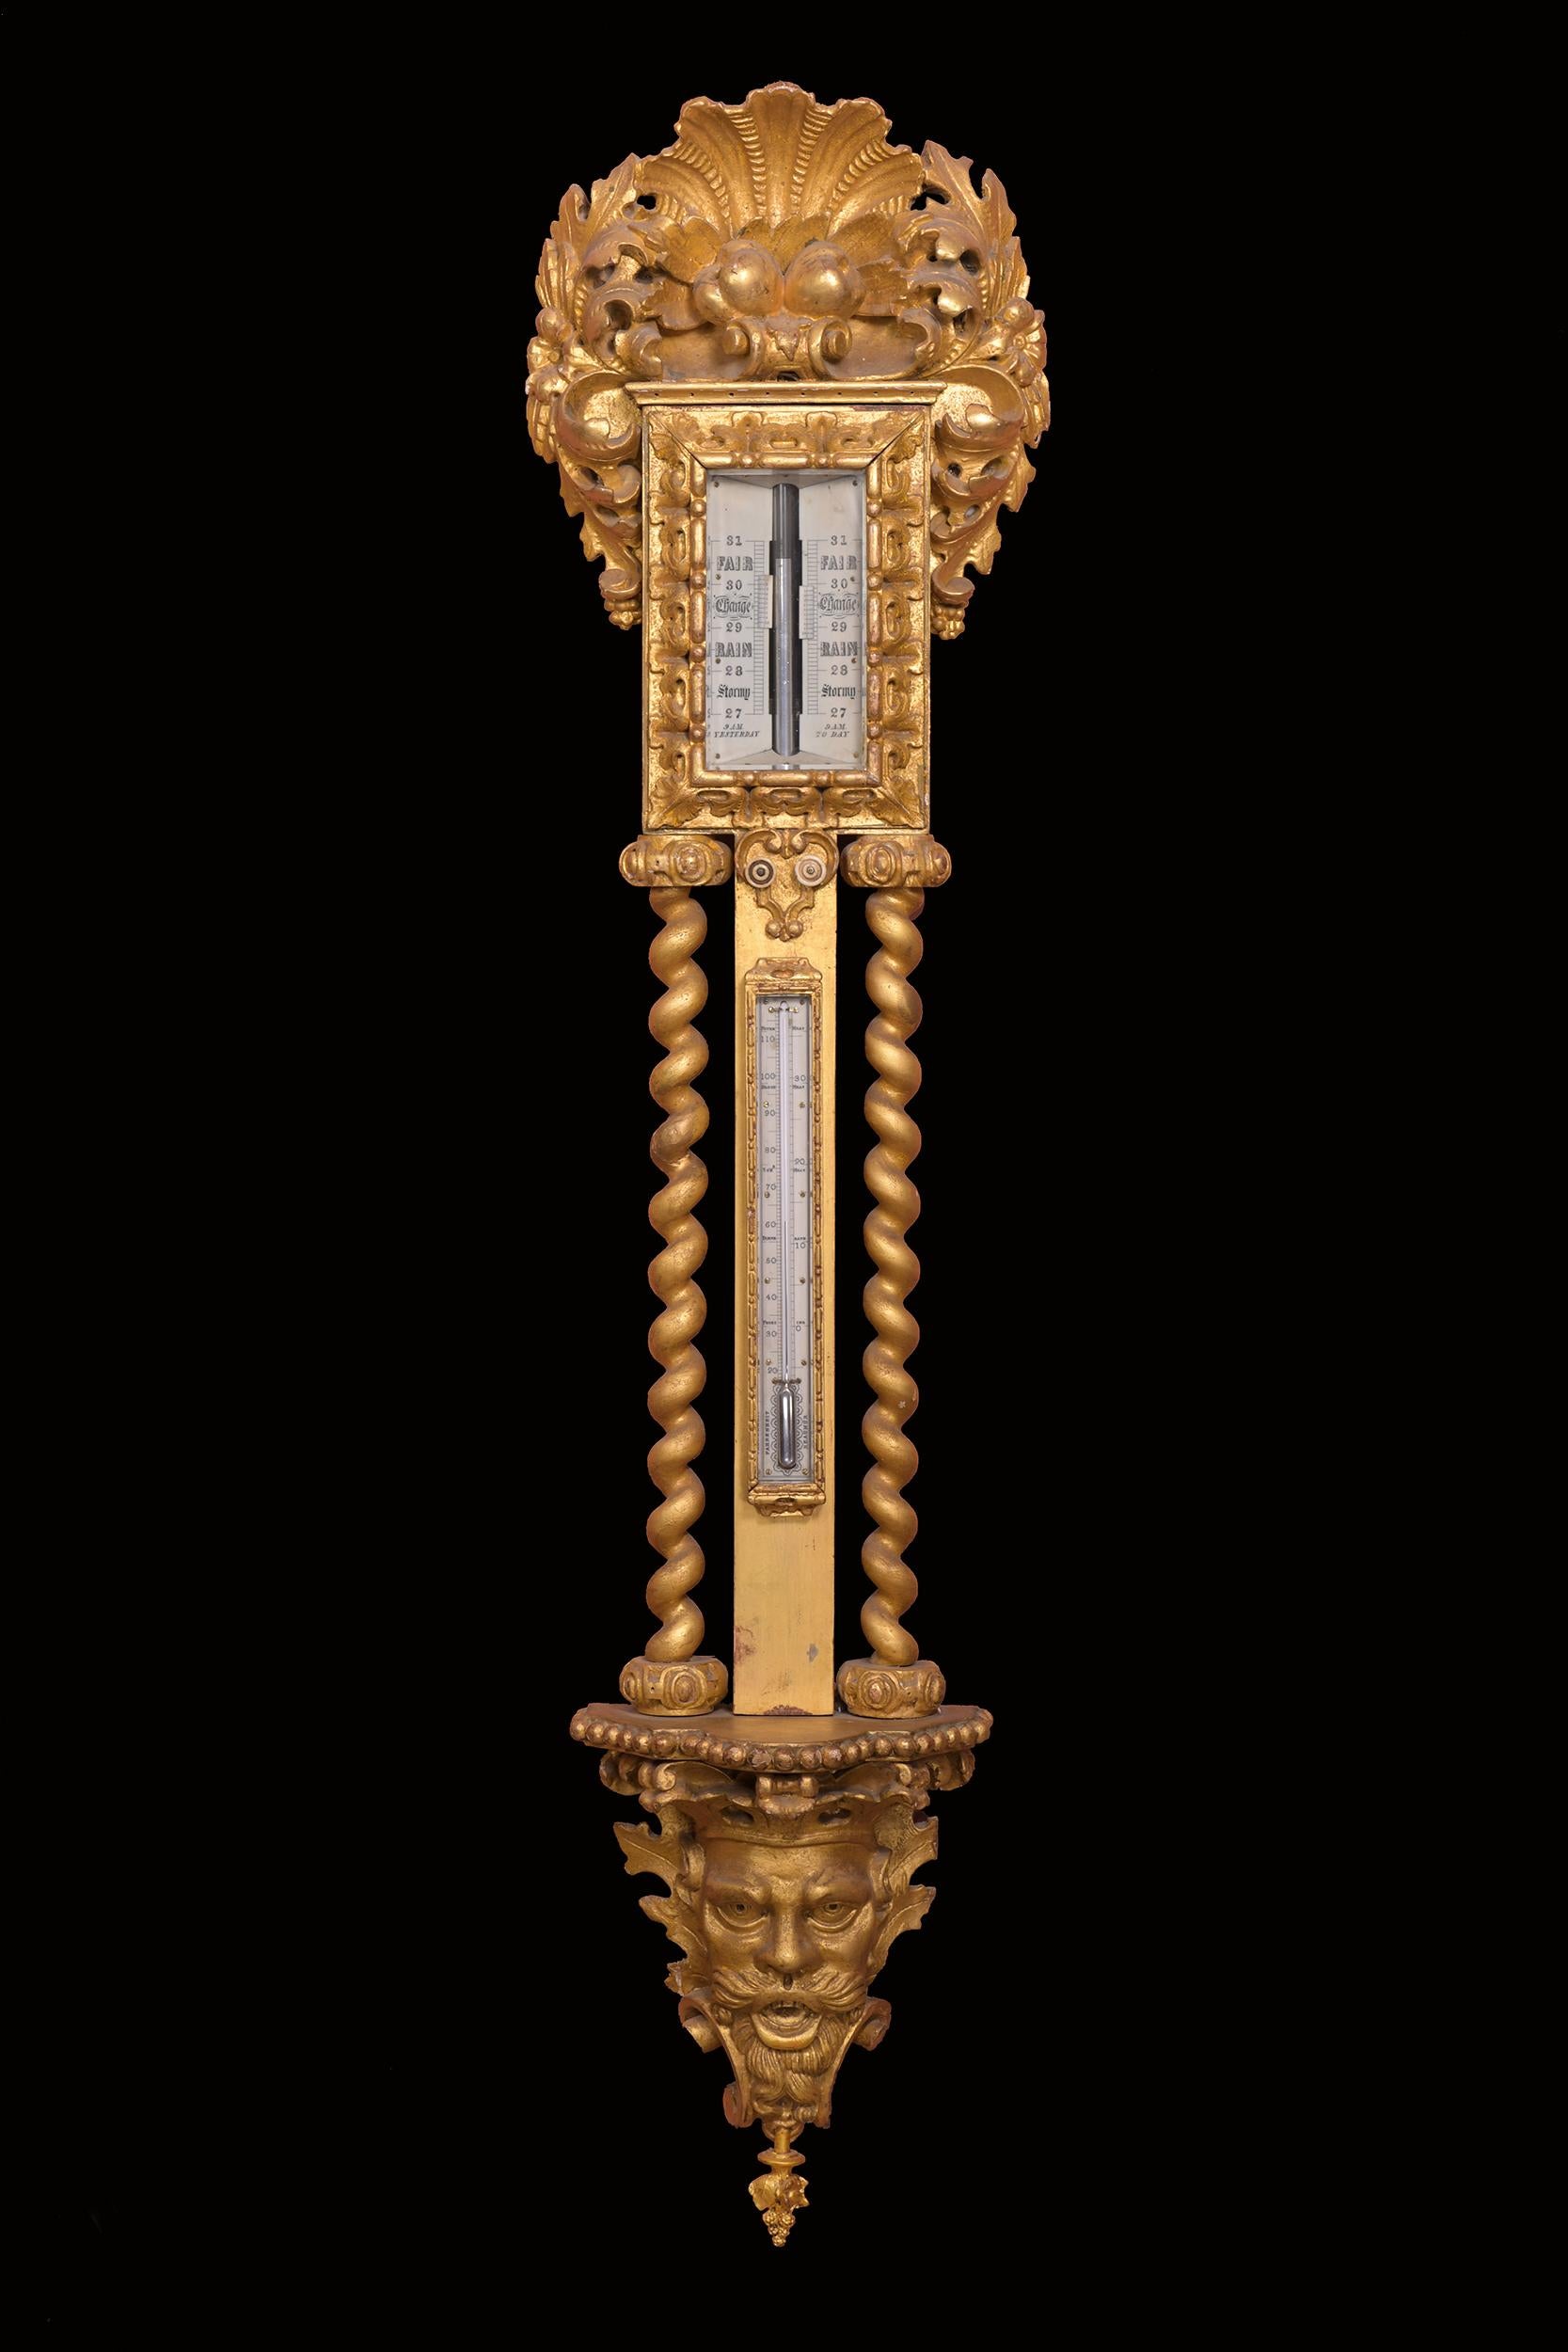 A fascinating Irish giltwood barometer in the baroque style. The large stick barometer features a large carved giltwood frame with a shell motif. The dial having the original twin Vernier scale adjuster with weather predictions from 27 to 31 and set